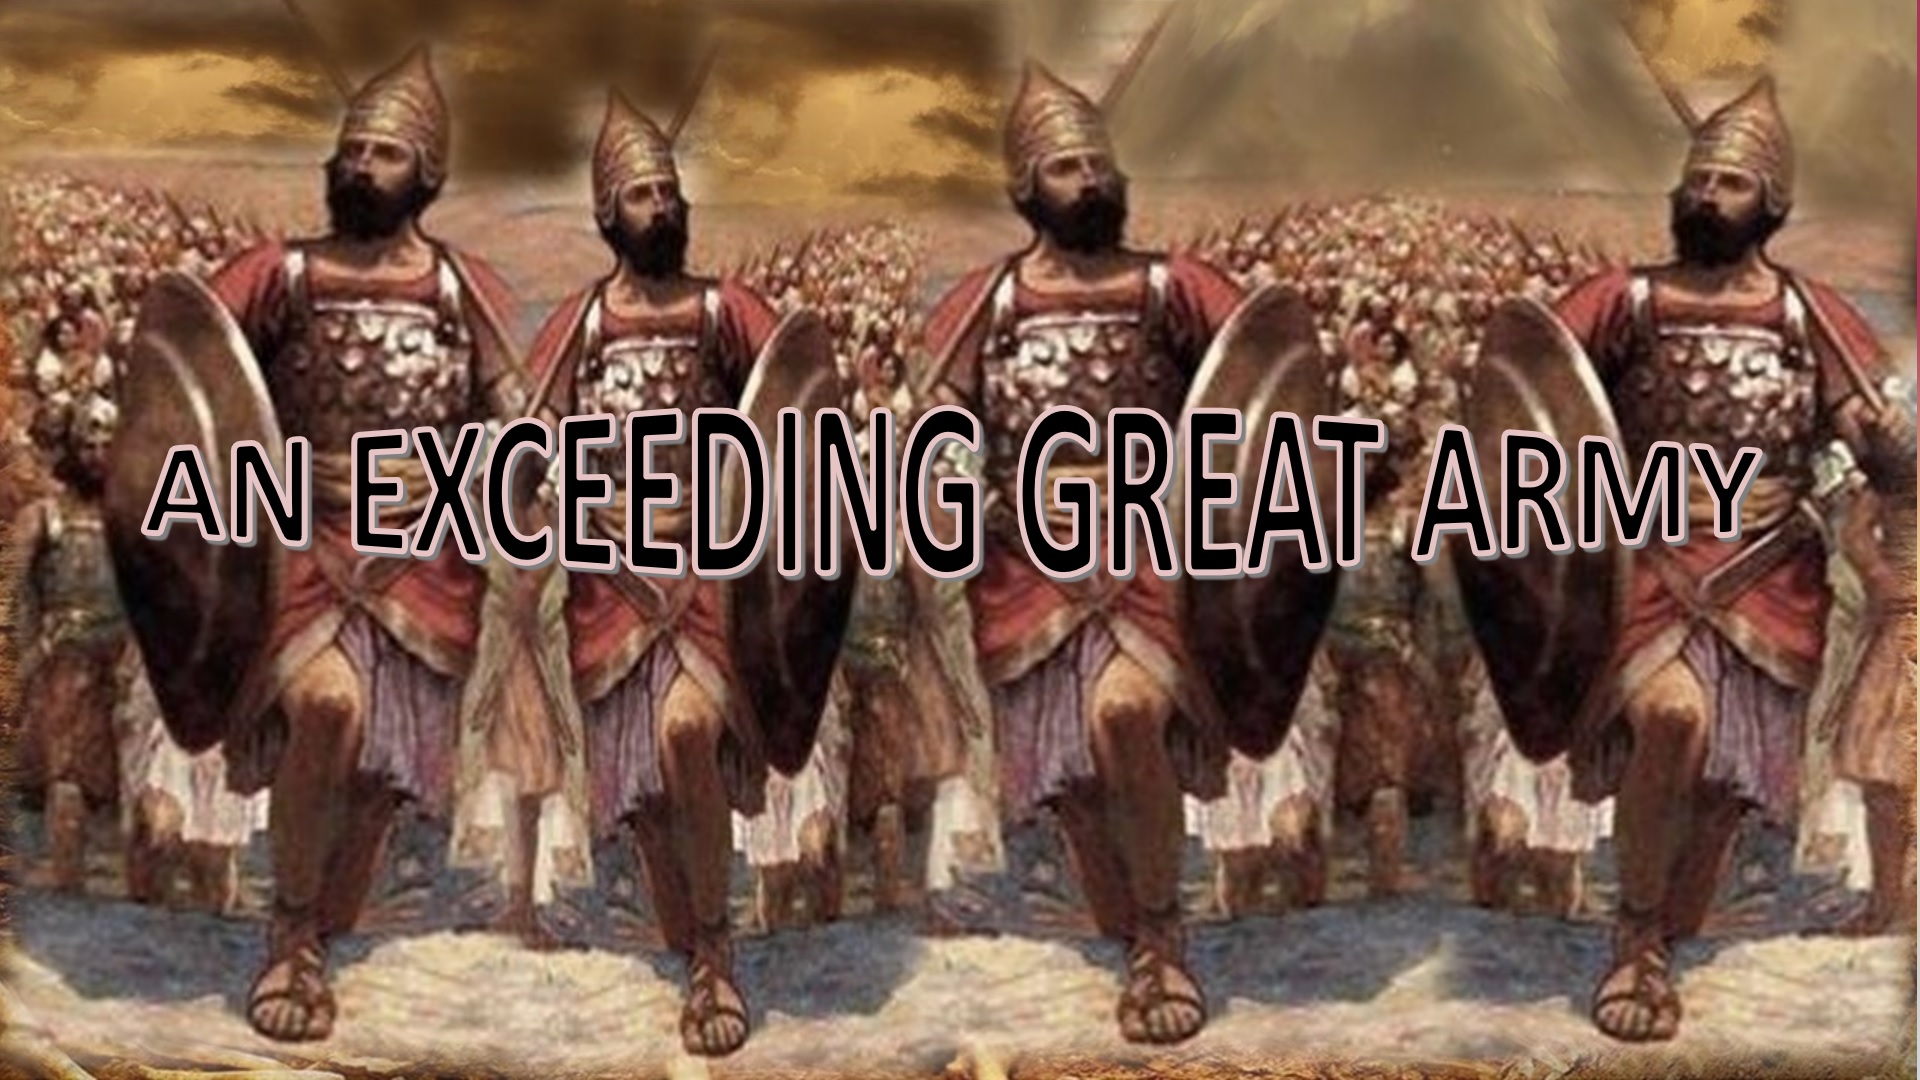 An Exceeding Great Army